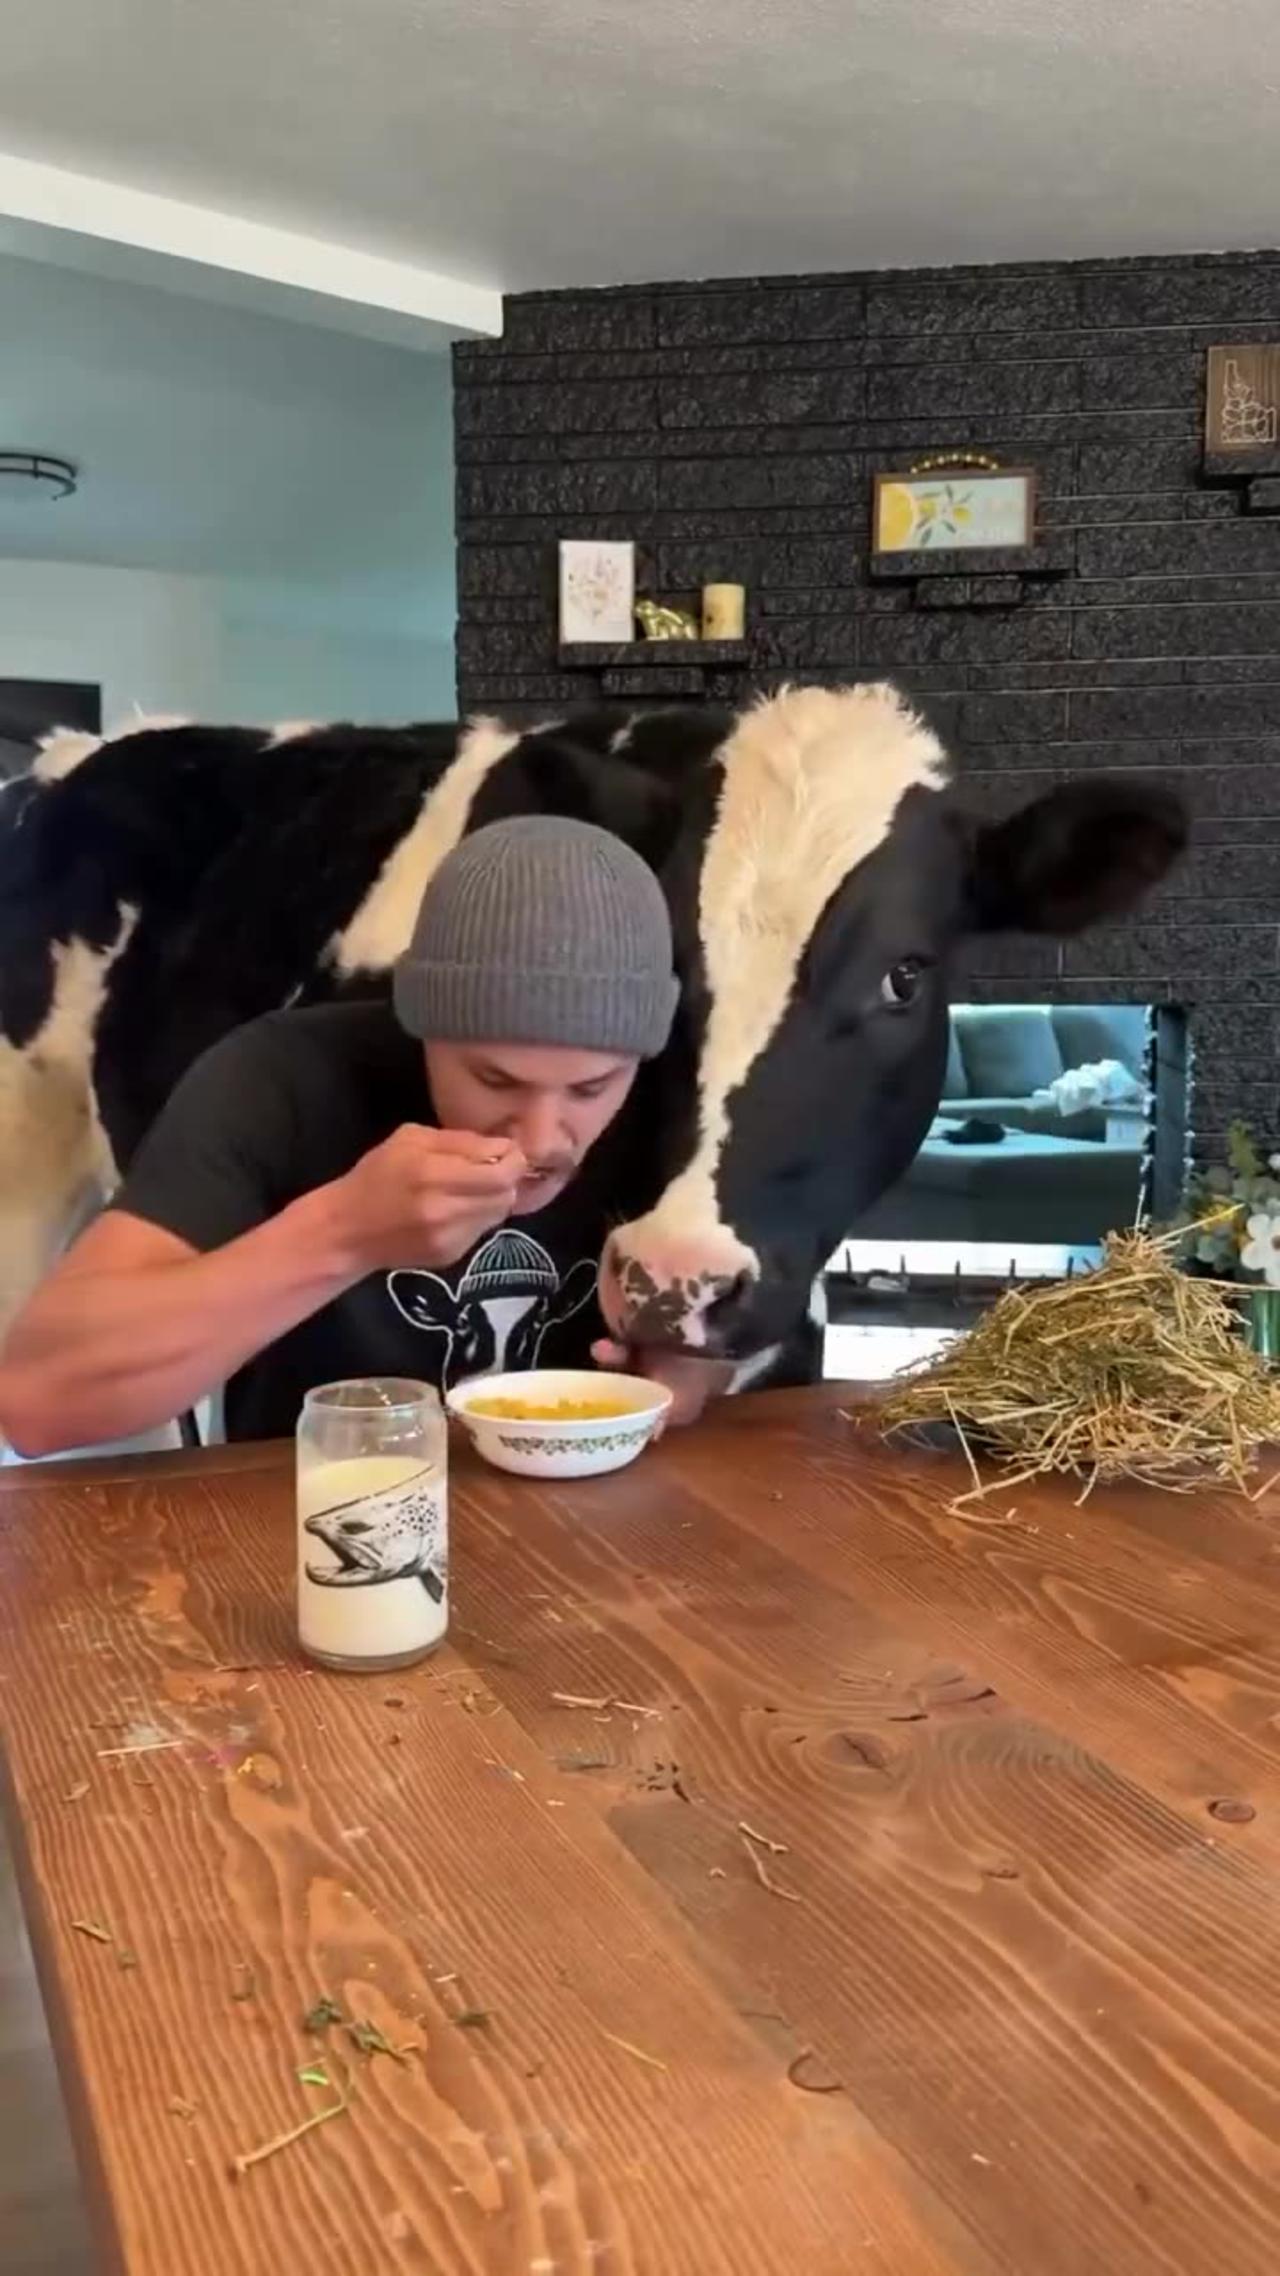 Cow As House Pet - One News Page VIDEO